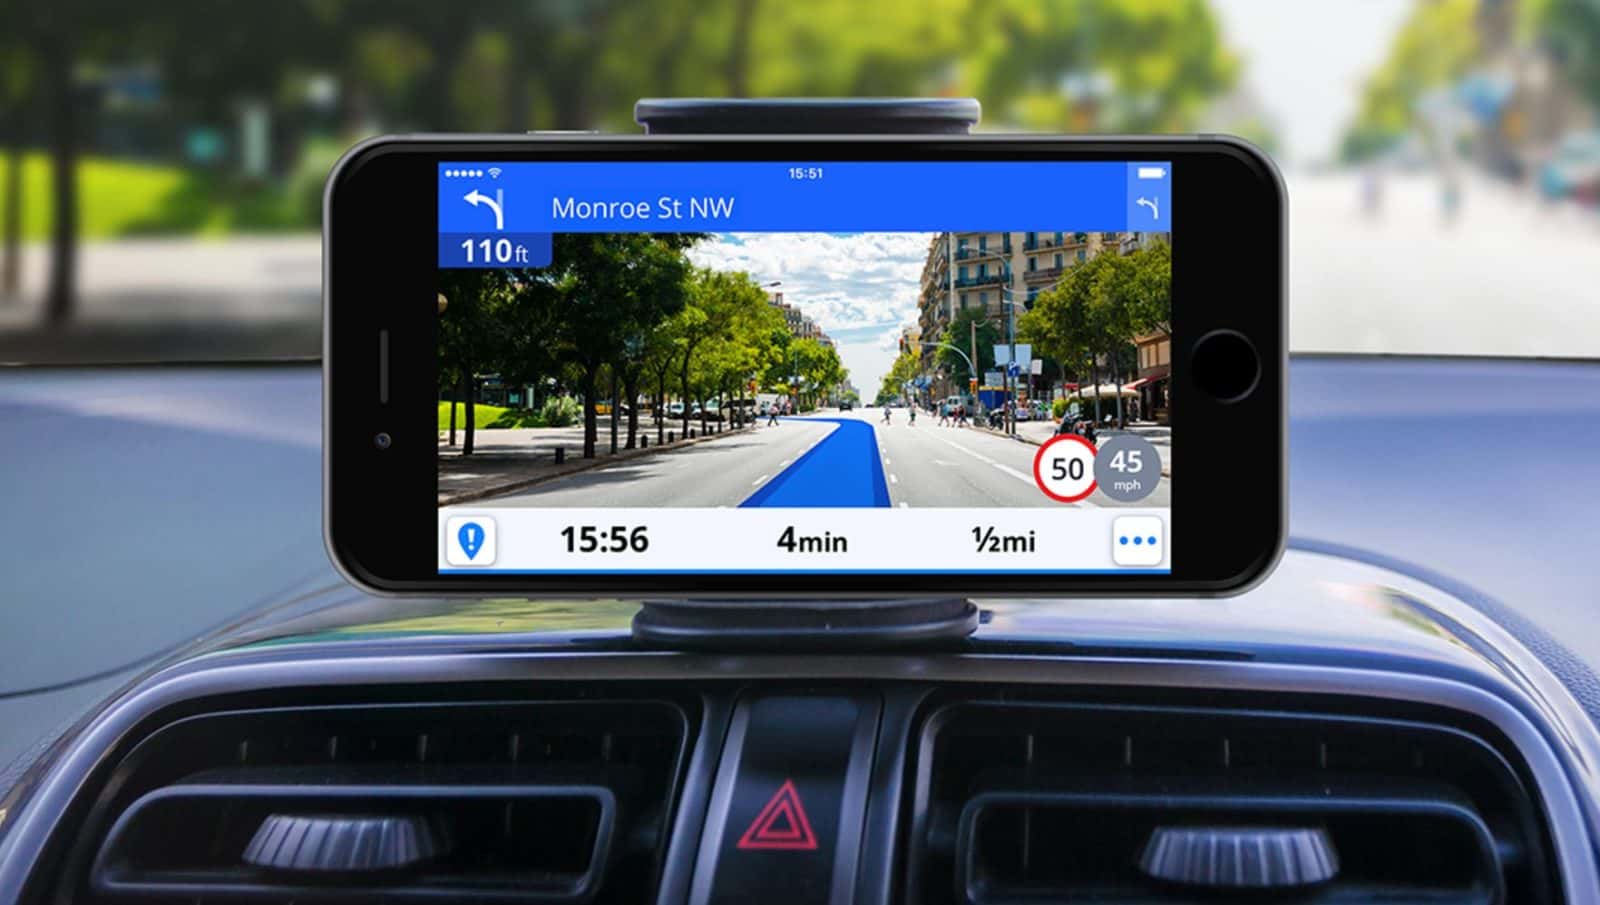 When Using A Gps App Like Waze Or Google Maps You Are Using Augmented Reality.